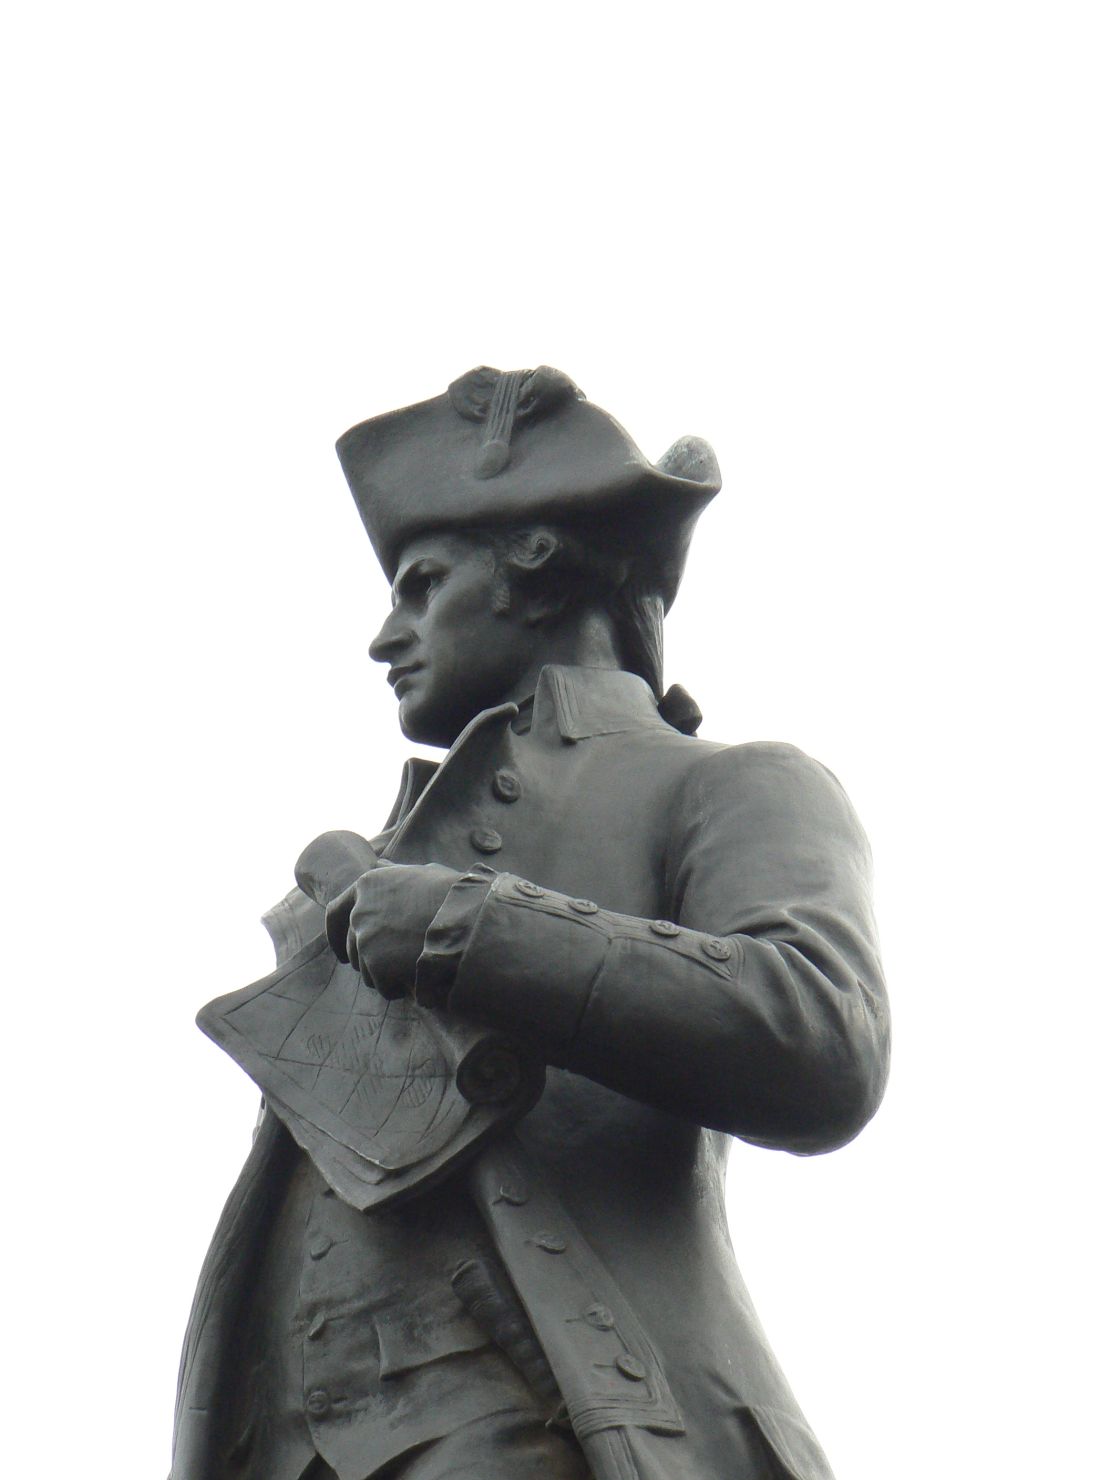 Statue of Captain James Cook at Admiralty Arch, London.